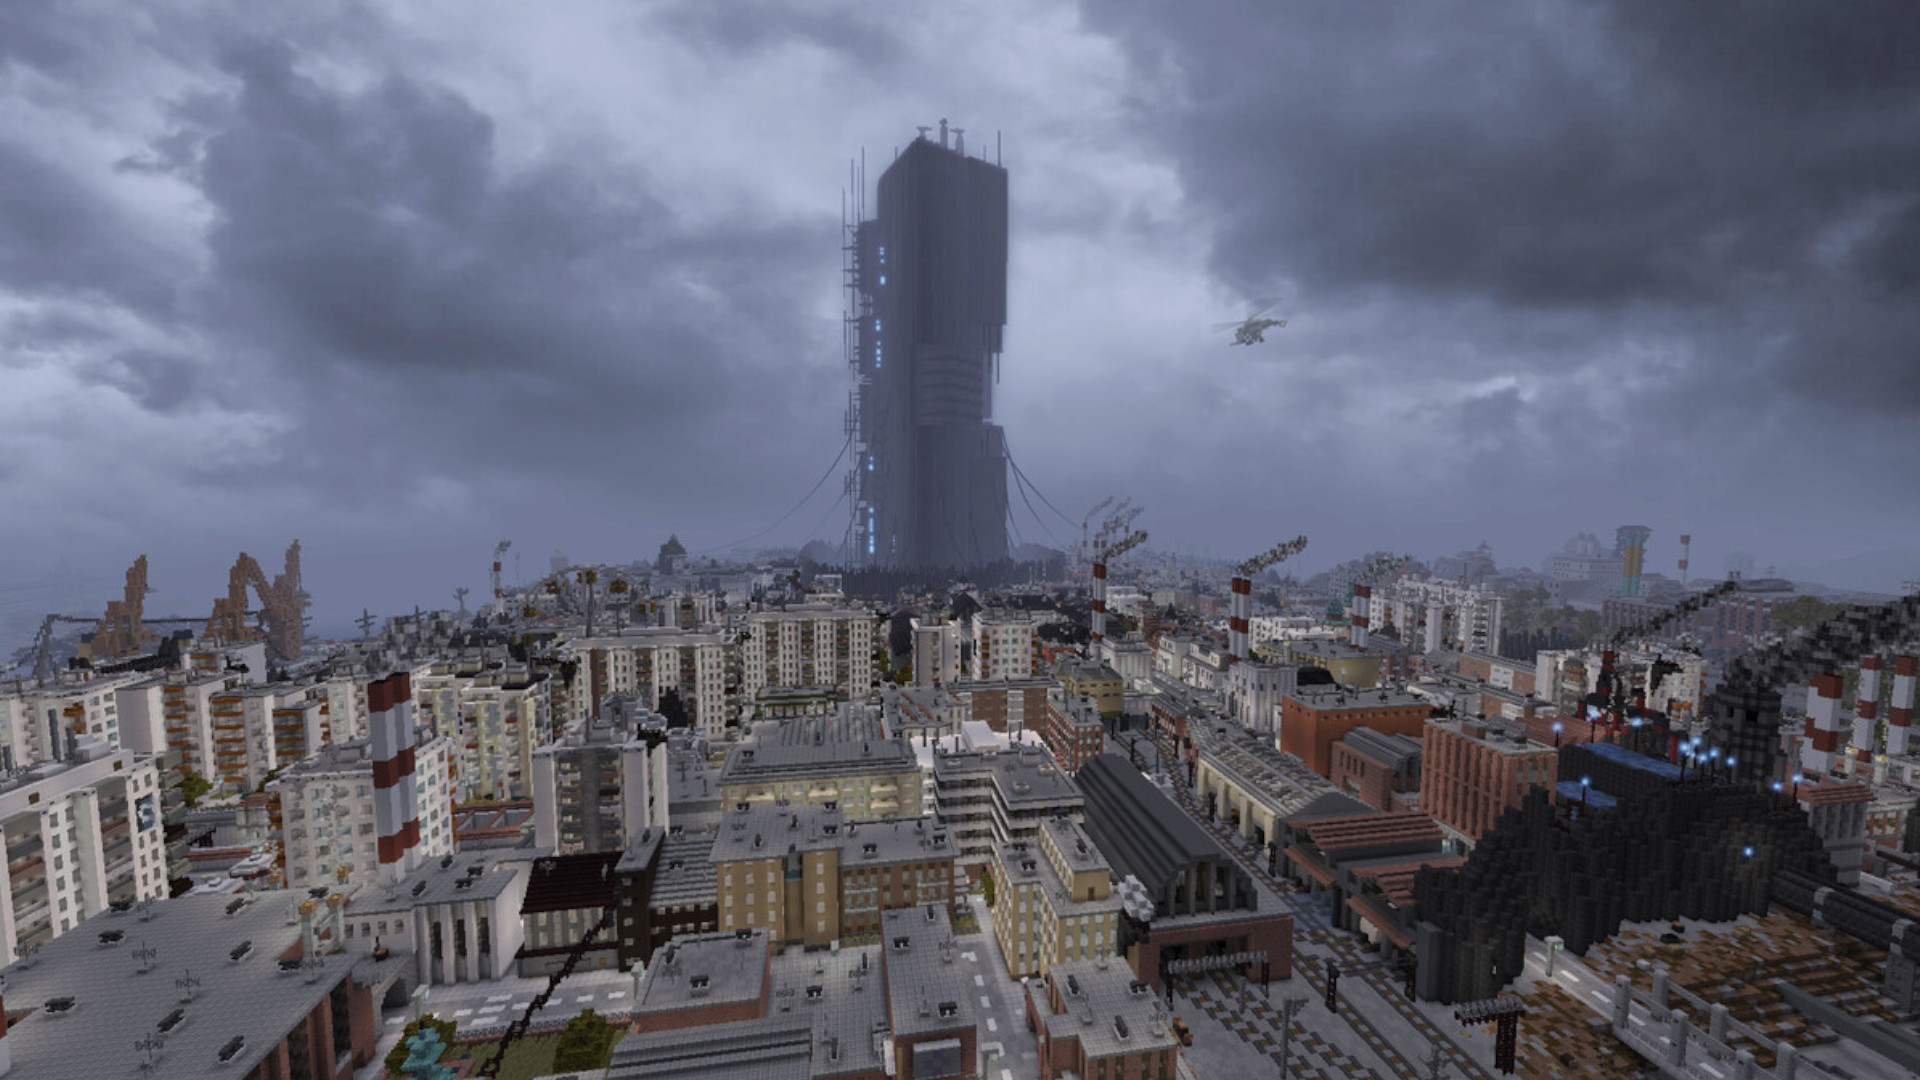 Players have spent five years rebuilding all of Half-Life 2 in one Minecraft map